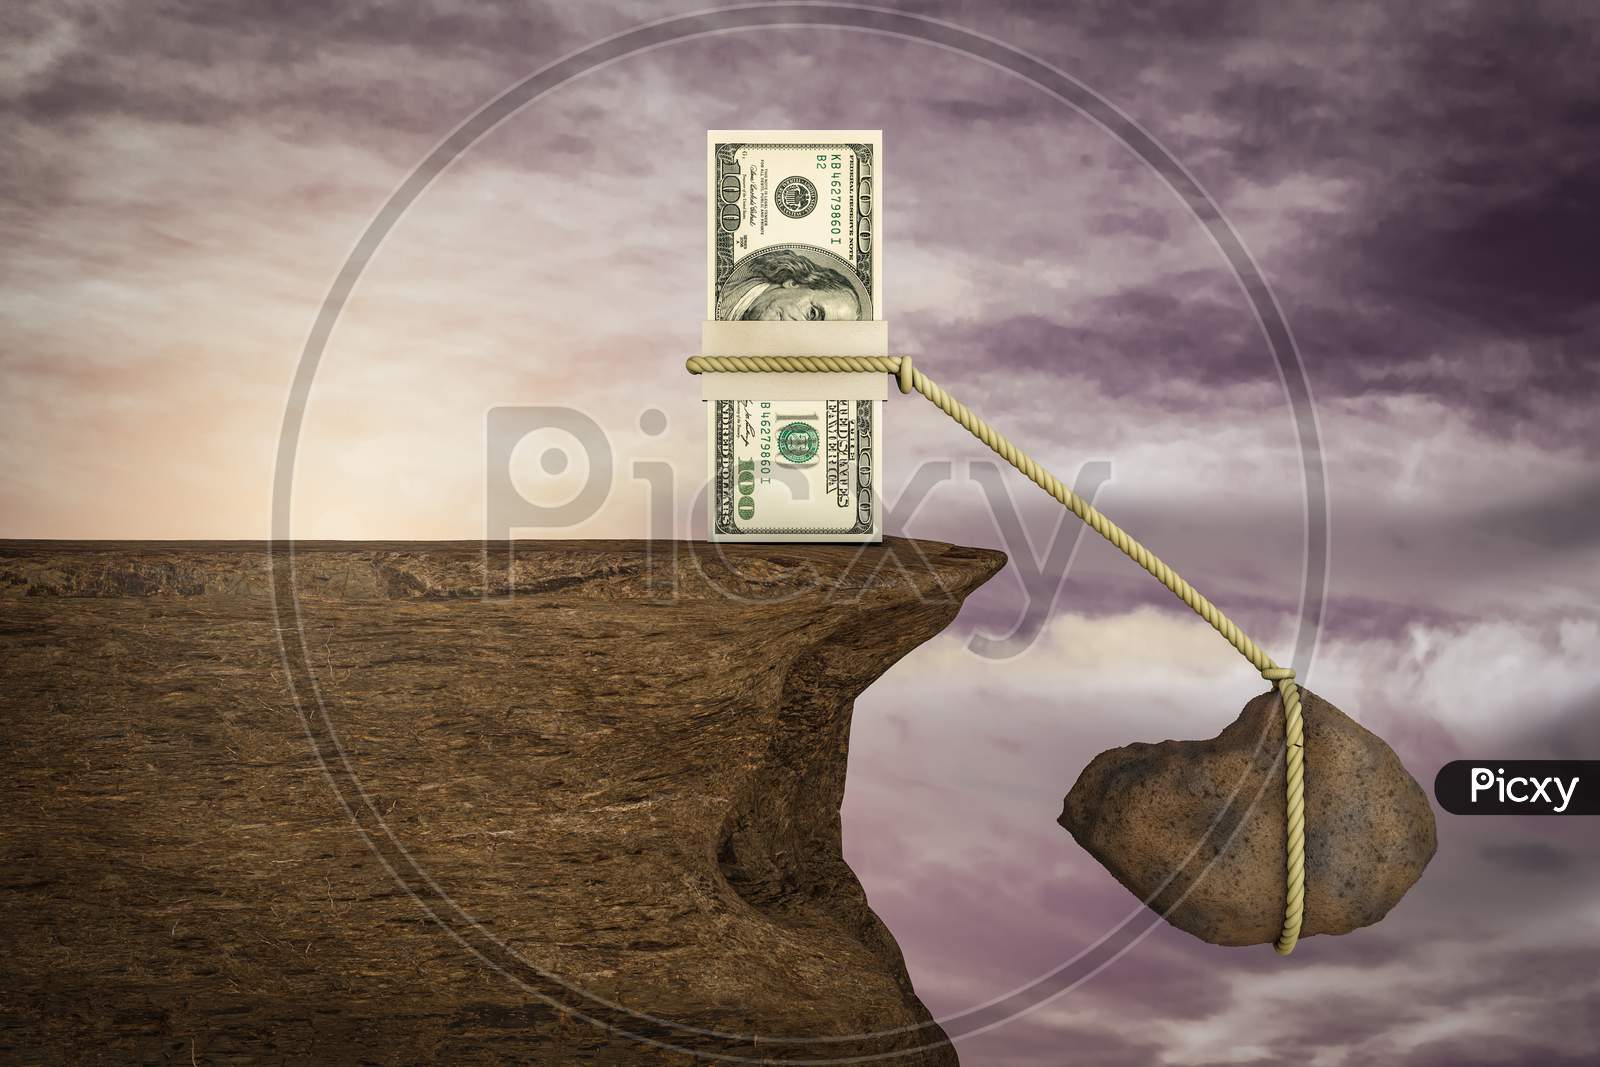 Stack Of One Hundred Dollar Depressed With Rock And Rope On Cliff At Sunset Magenta Day. Your Next Stimulus Payment May Be The Final One Or Don'T Bank On Tons Of Stimulus Cash Concept. 3D Illustration